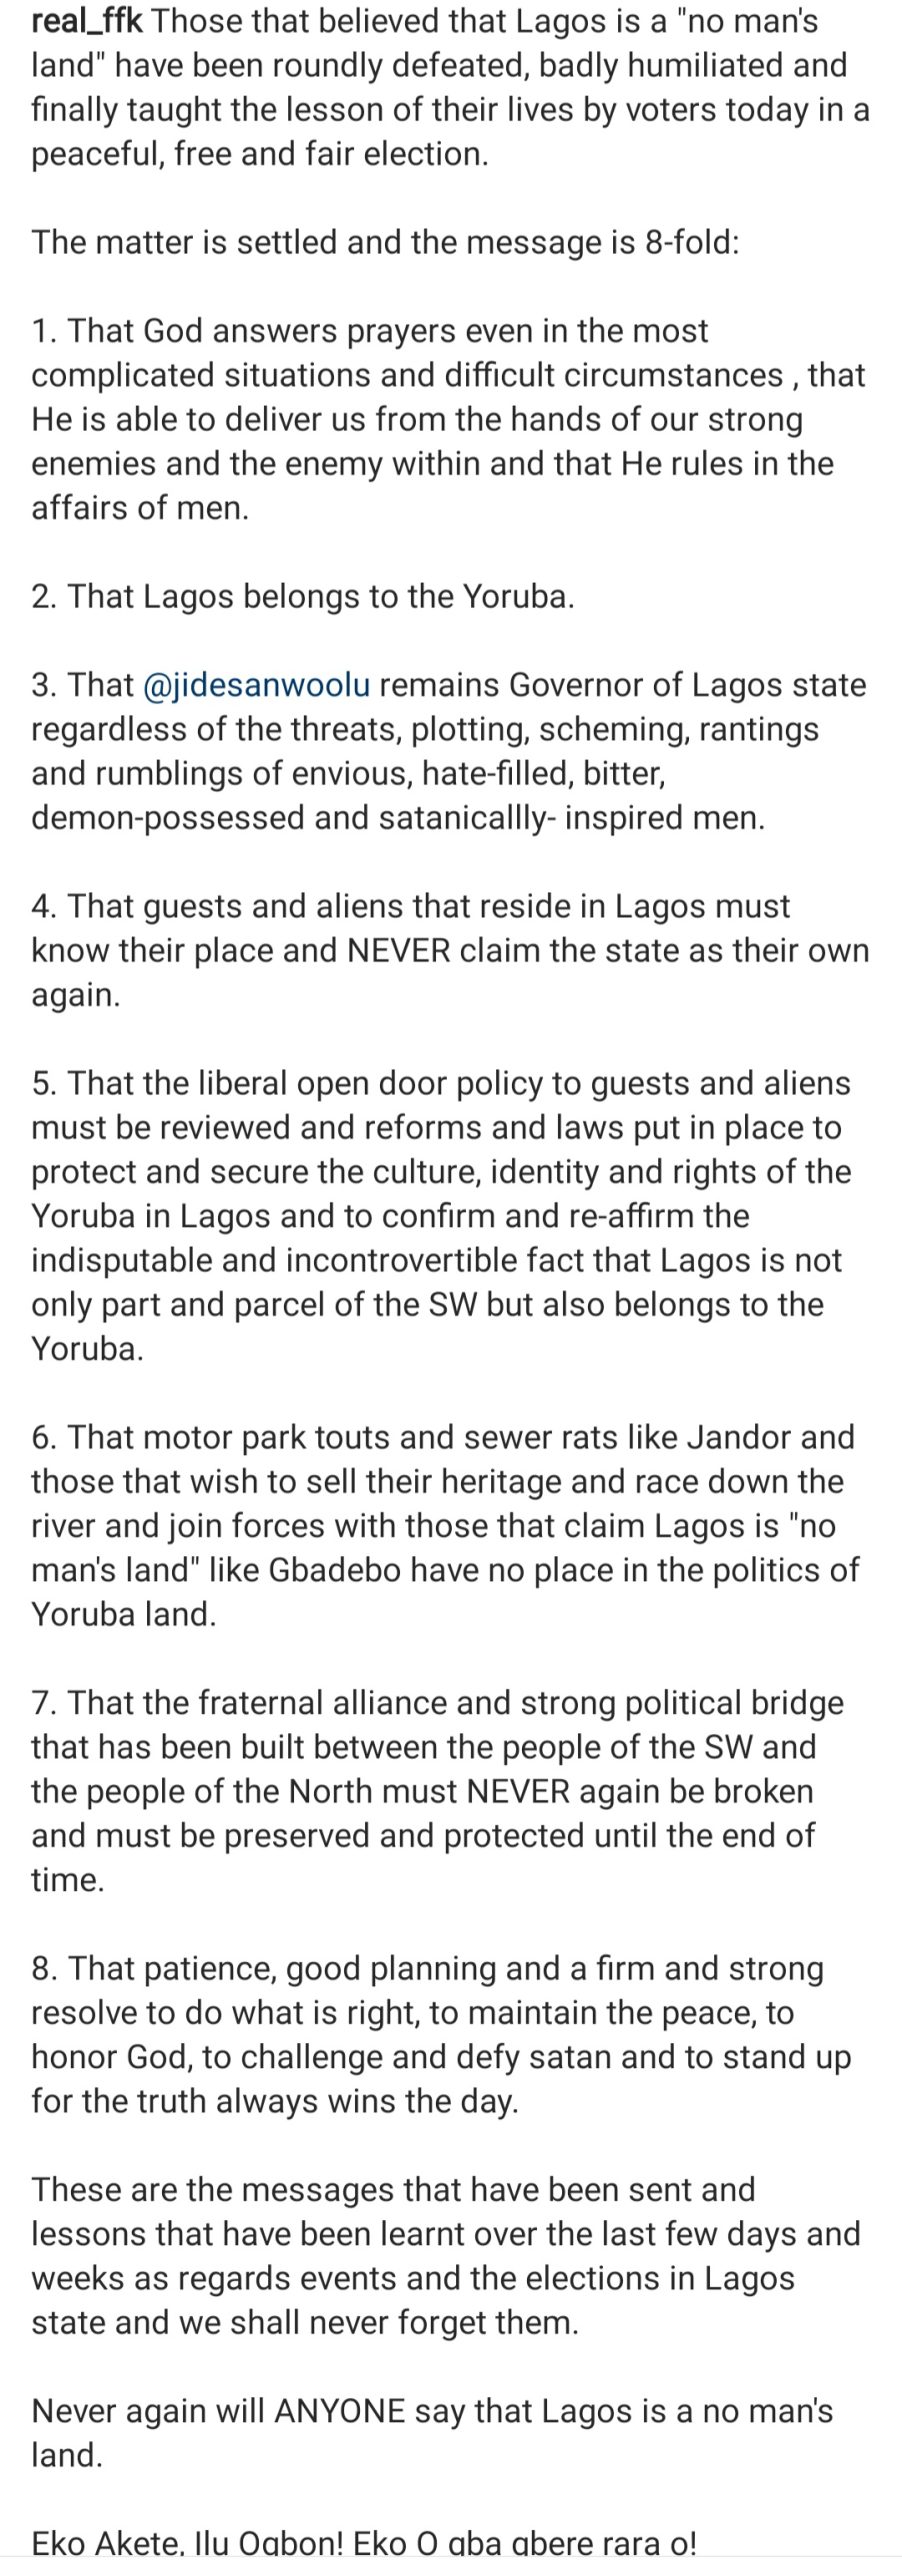 Those that believed Lagos is a no man